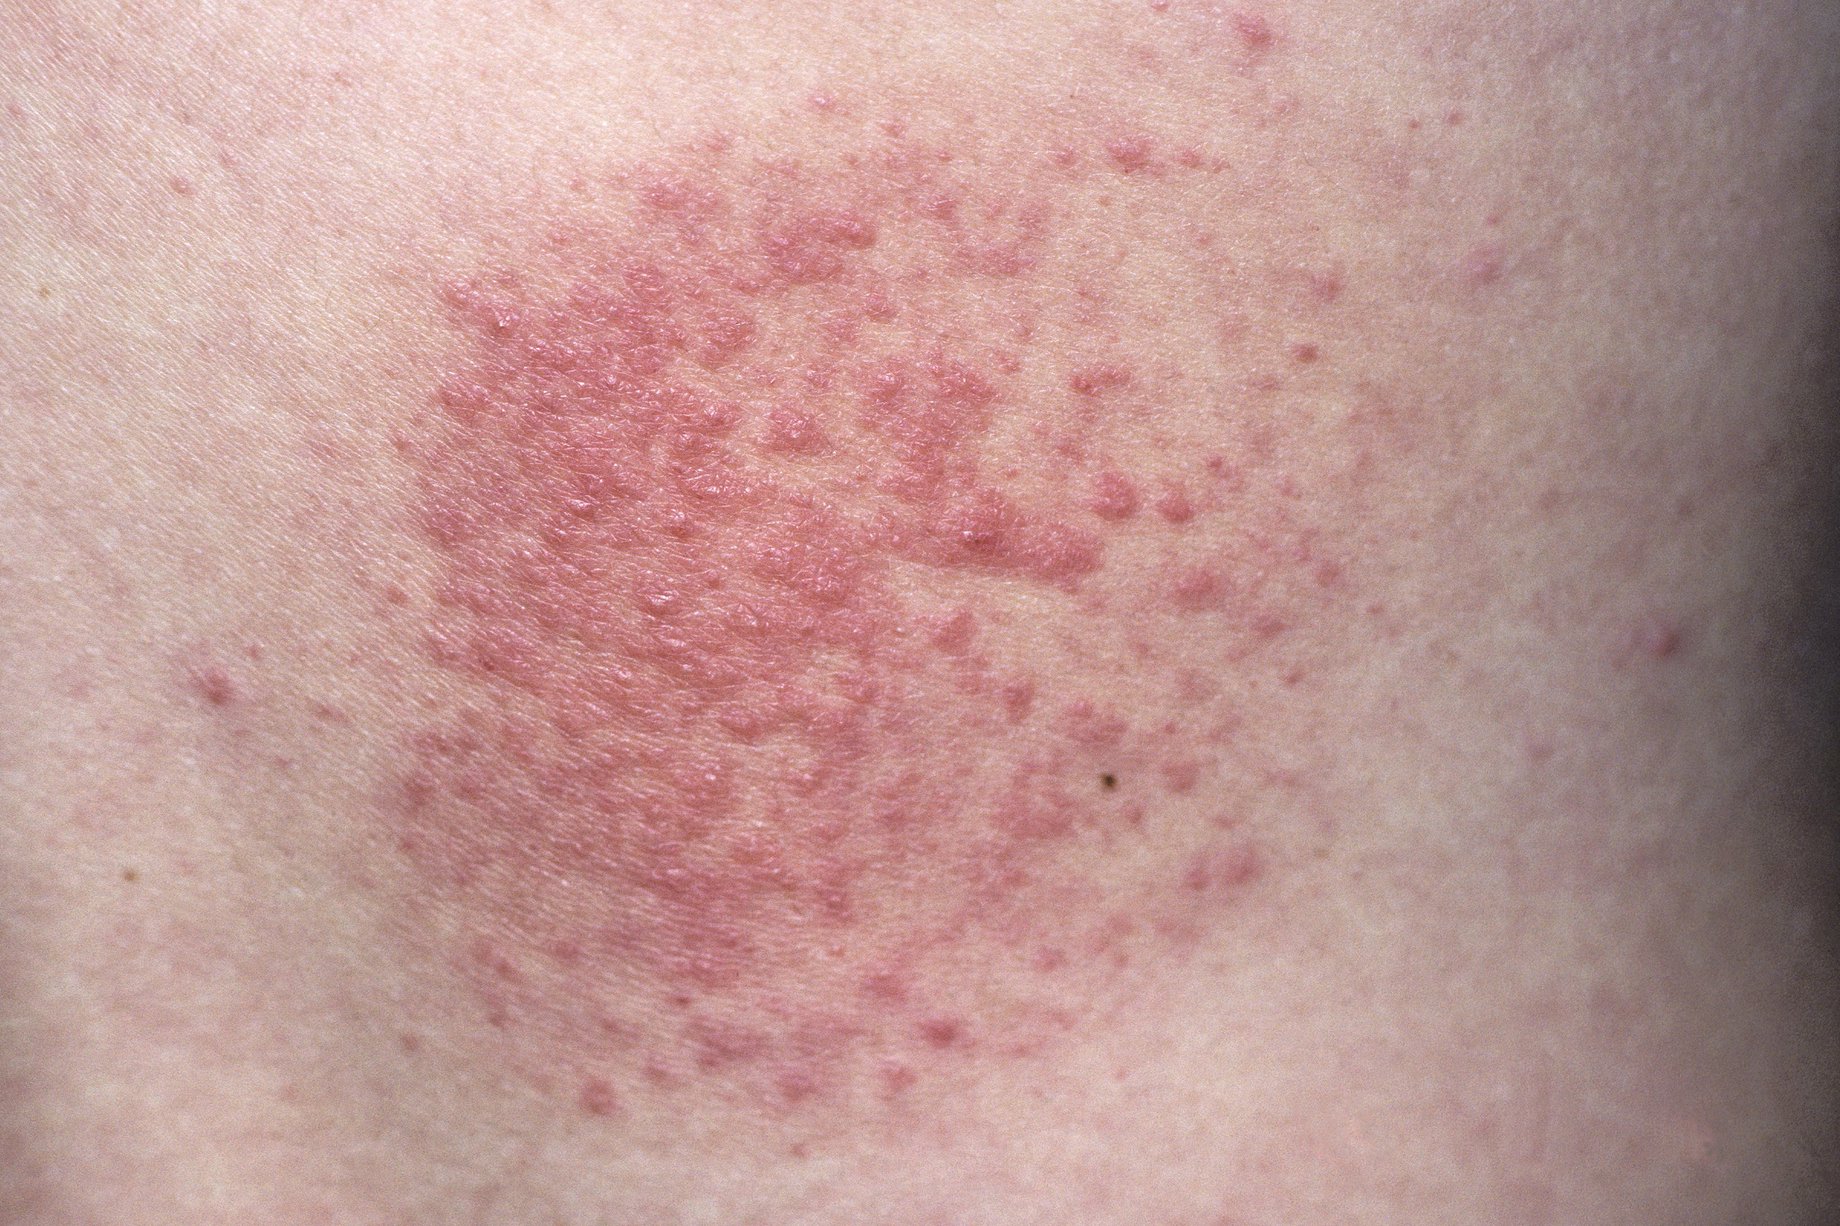 skin rashes that itch only on hand